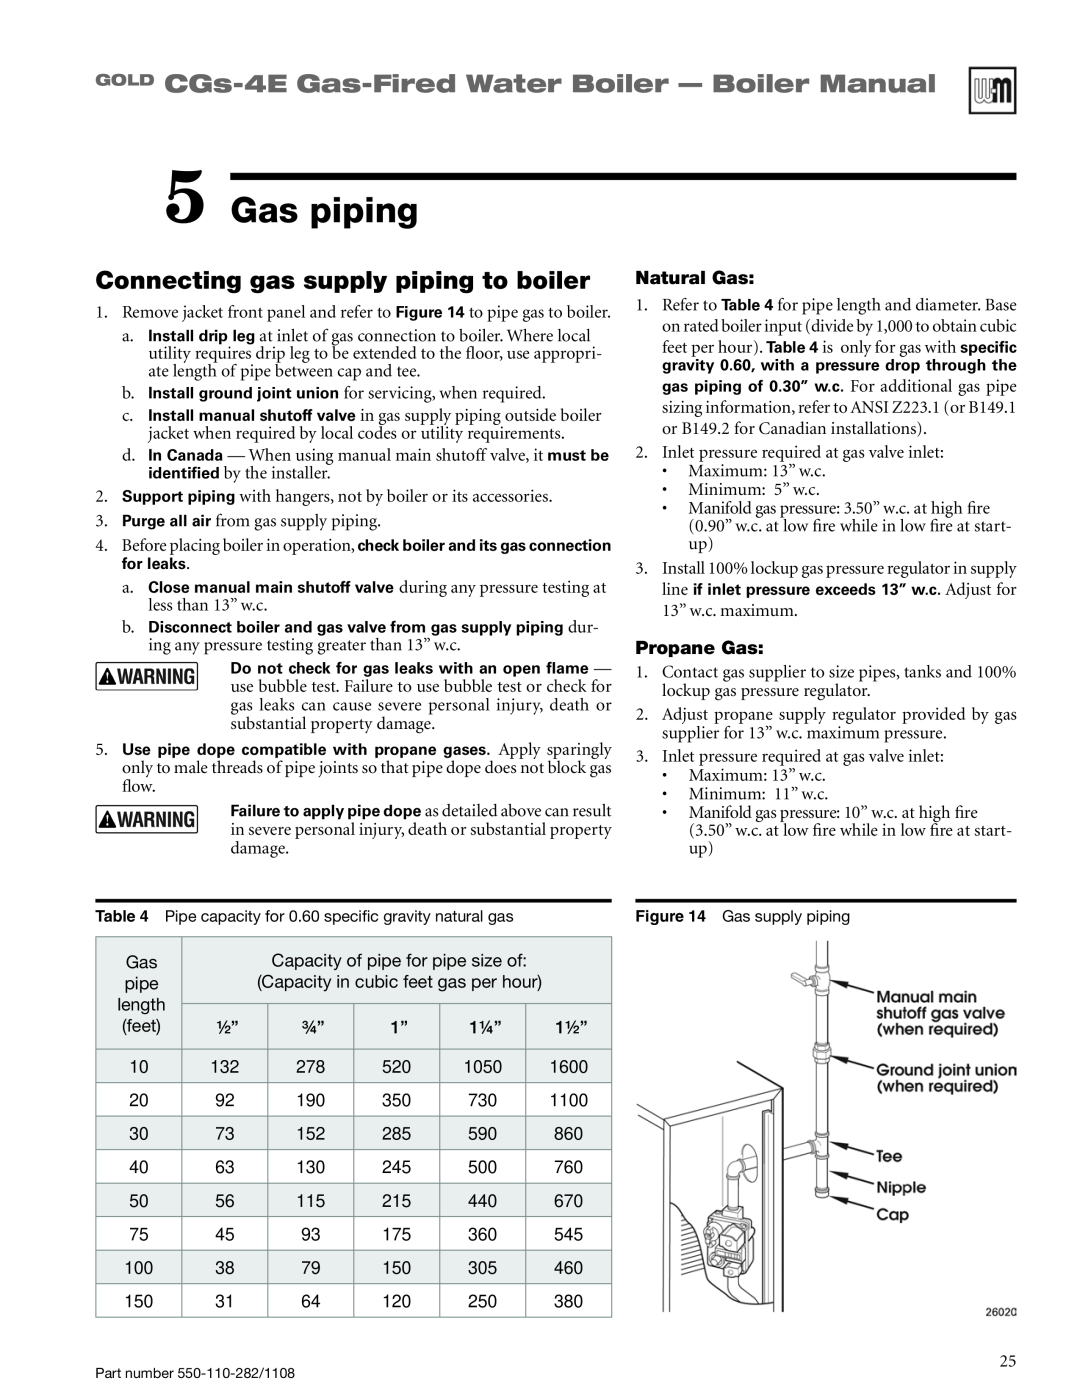 Weil-McLain CGS-4E Gas piping, Connecting gas supply piping to boiler, GOLD CGs-4E Gas-FiredWater Boiler - Boiler Manual 